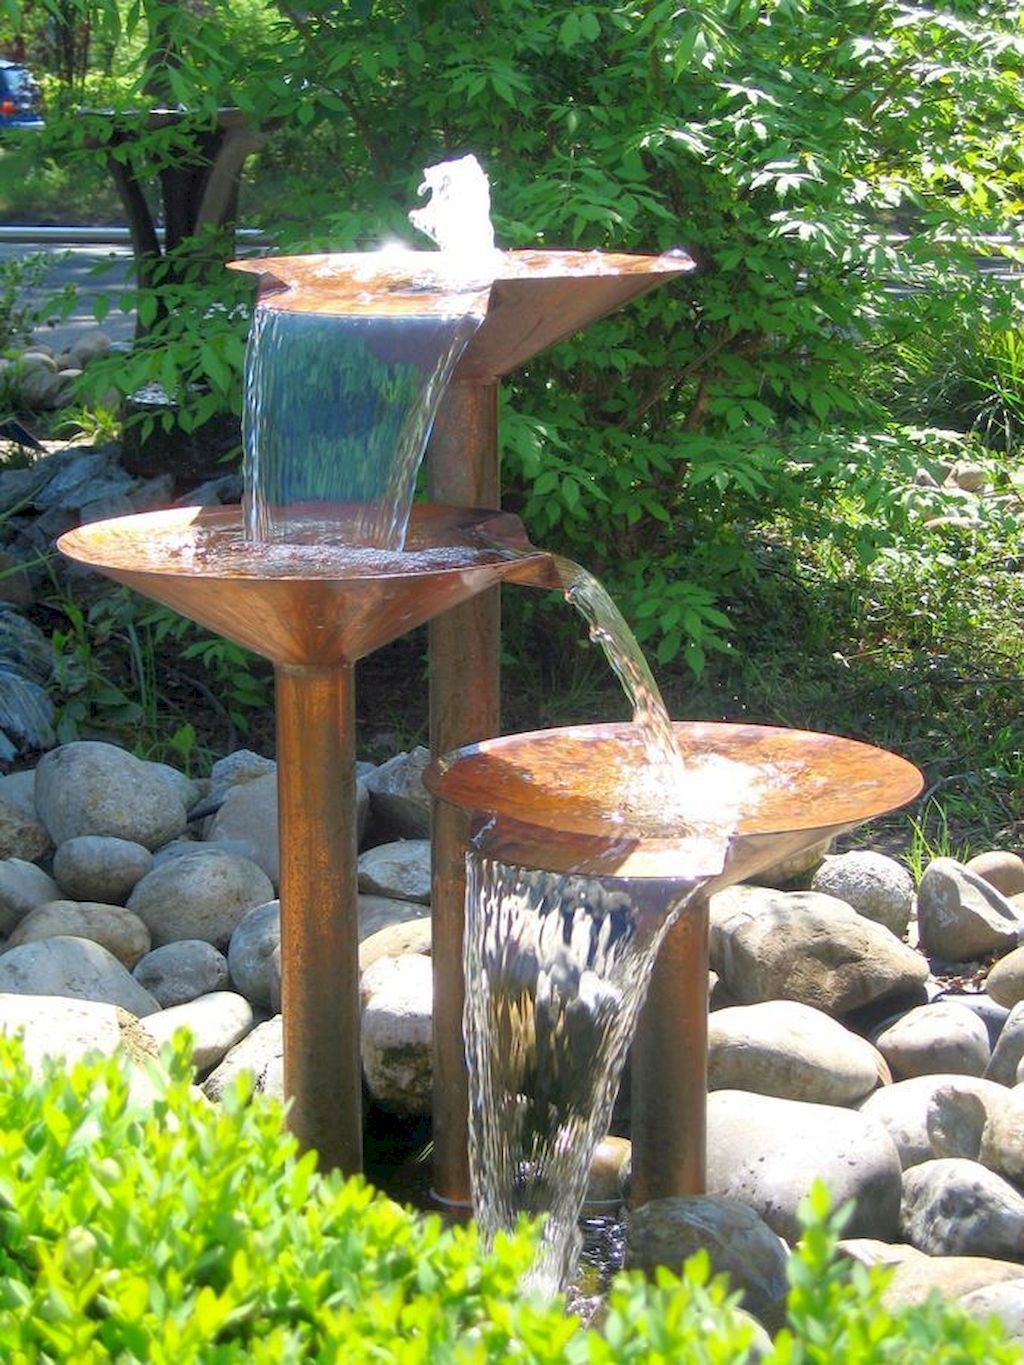 Awesome Garden Fountains That Will Steal The Show | Fontaine ... intérieur Fontaine De Jardin Moderne